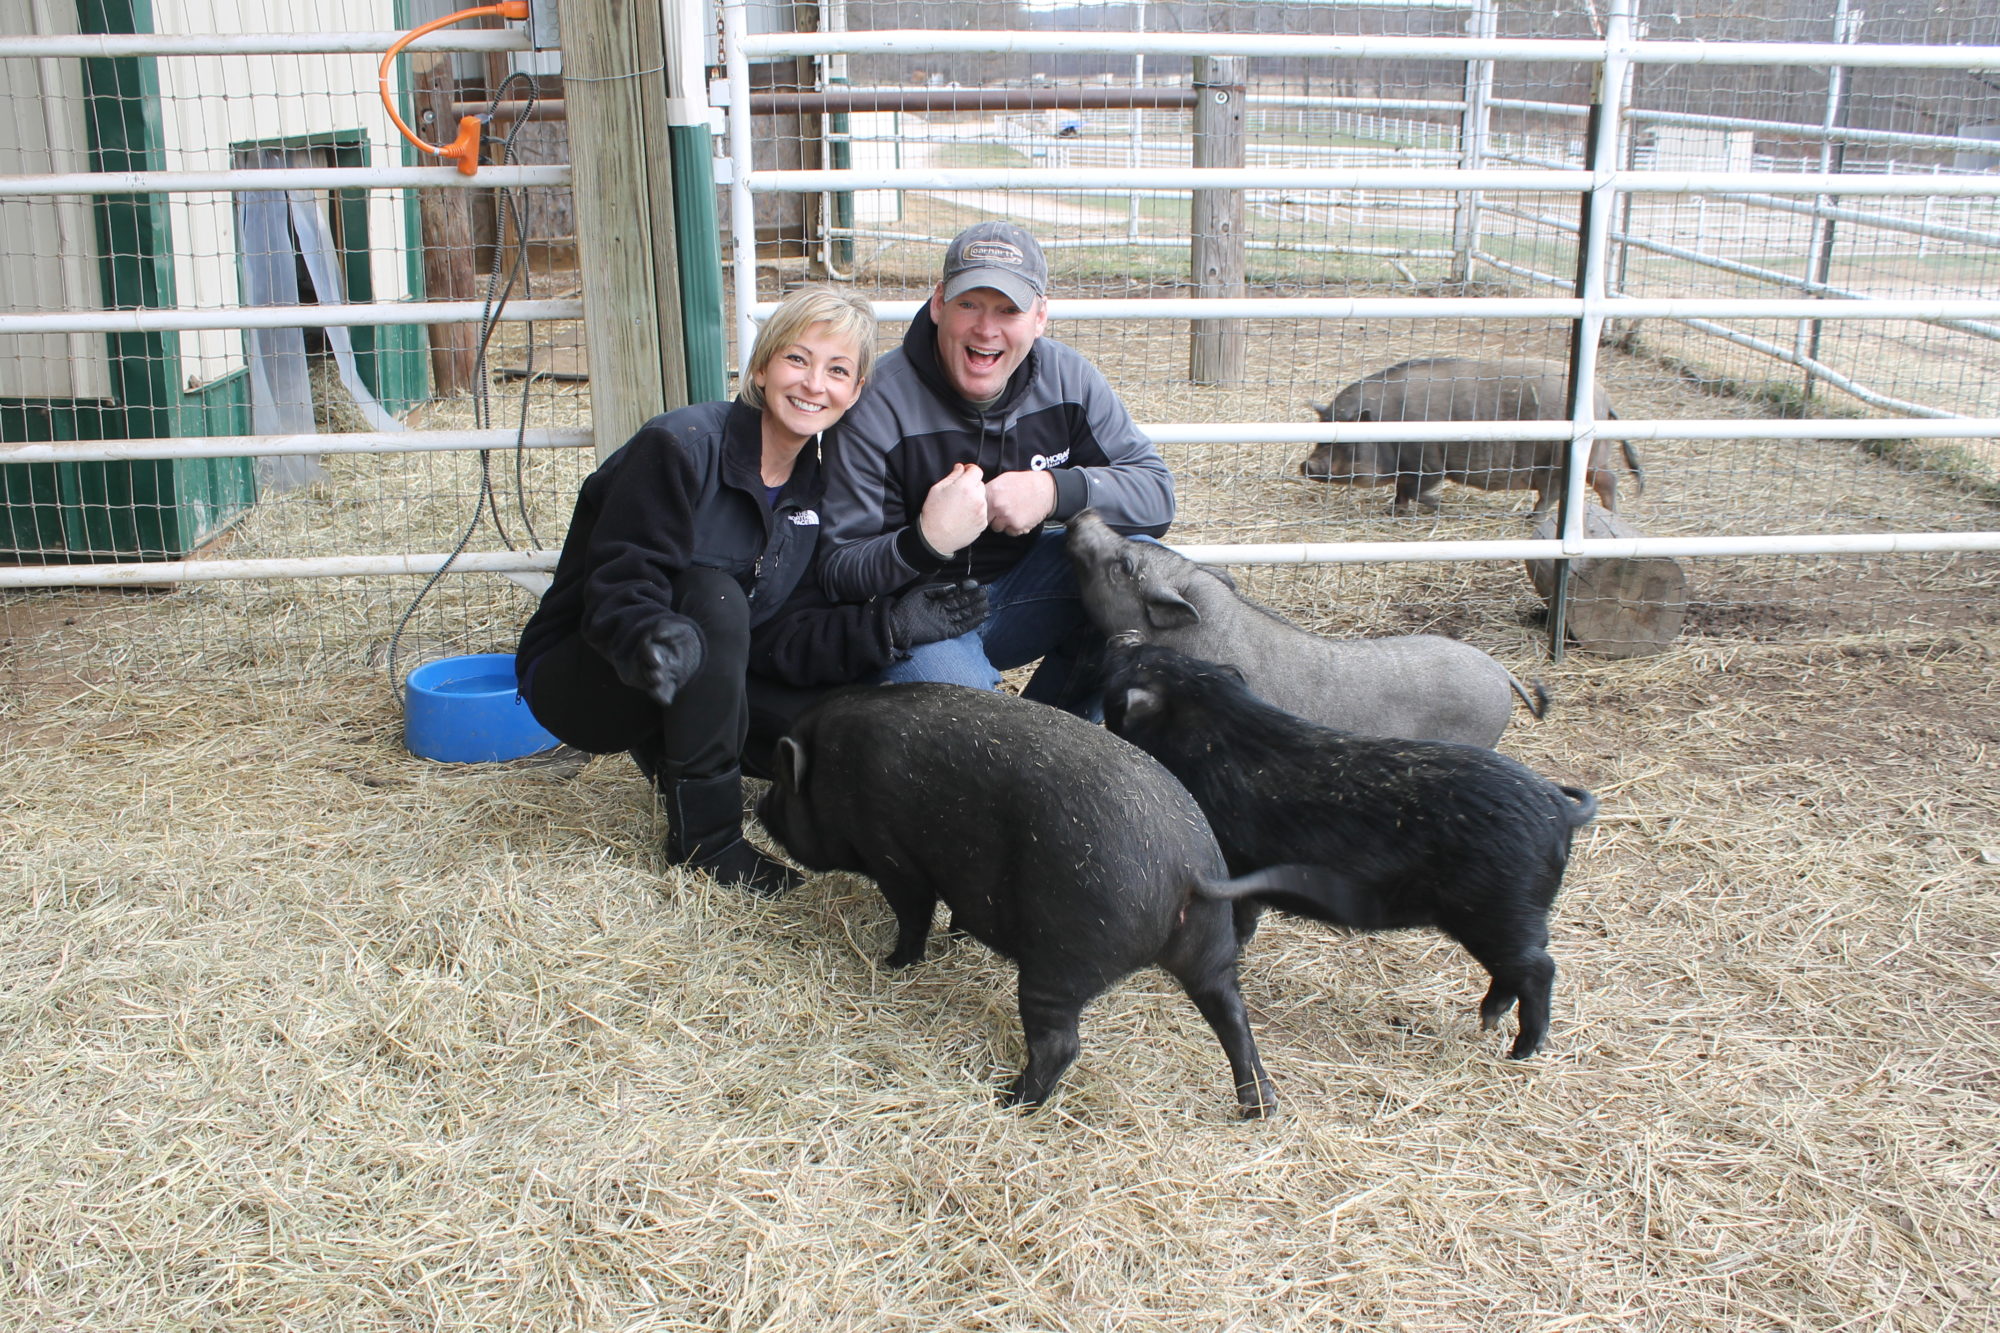 Hannah, Toby and Tootsie got a second chance and a forever home thanks to Longmeadow